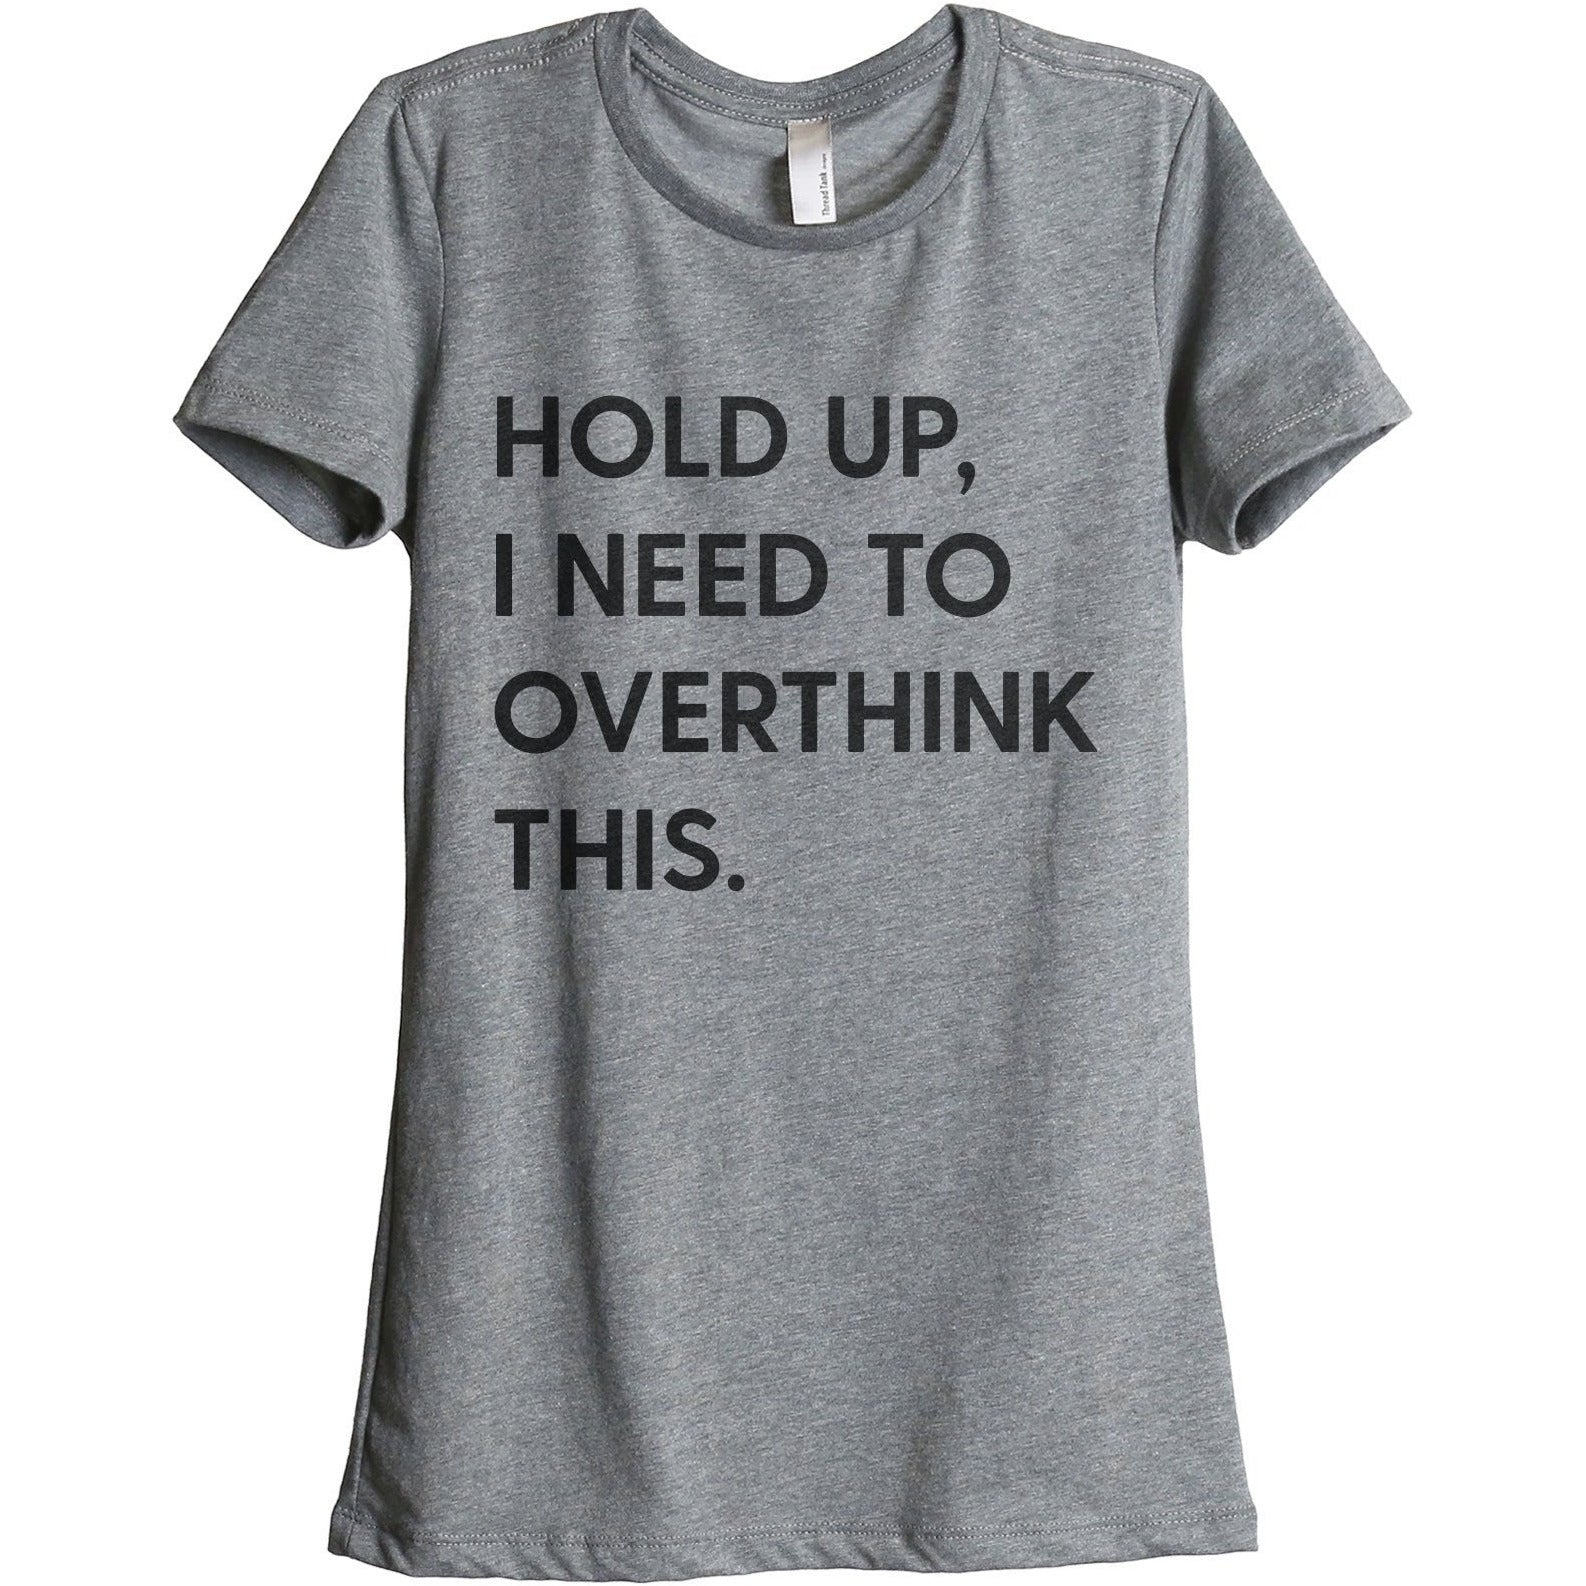 Hold Up, I Need To Rethink This Women's Relaxed Crewneck T-Shirt Top Tee Heather Grey